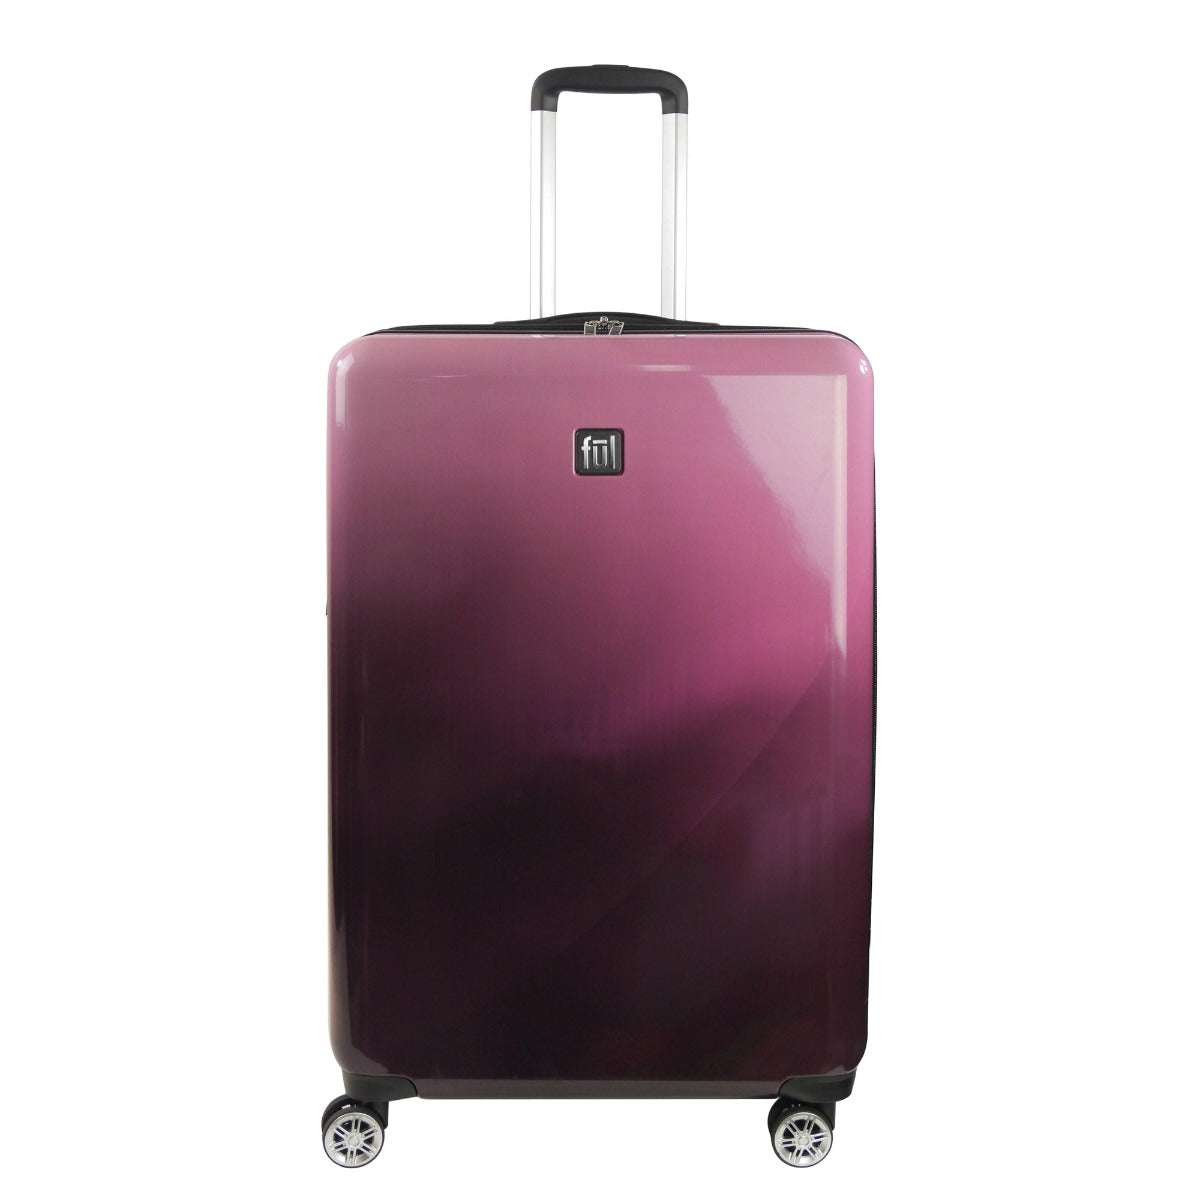 Ful Impulse Ombre Hardside Spinner Suitcase 31" Checked Luggage Pink Purple Fade 360° spinner wheels 2" expansion compression straps